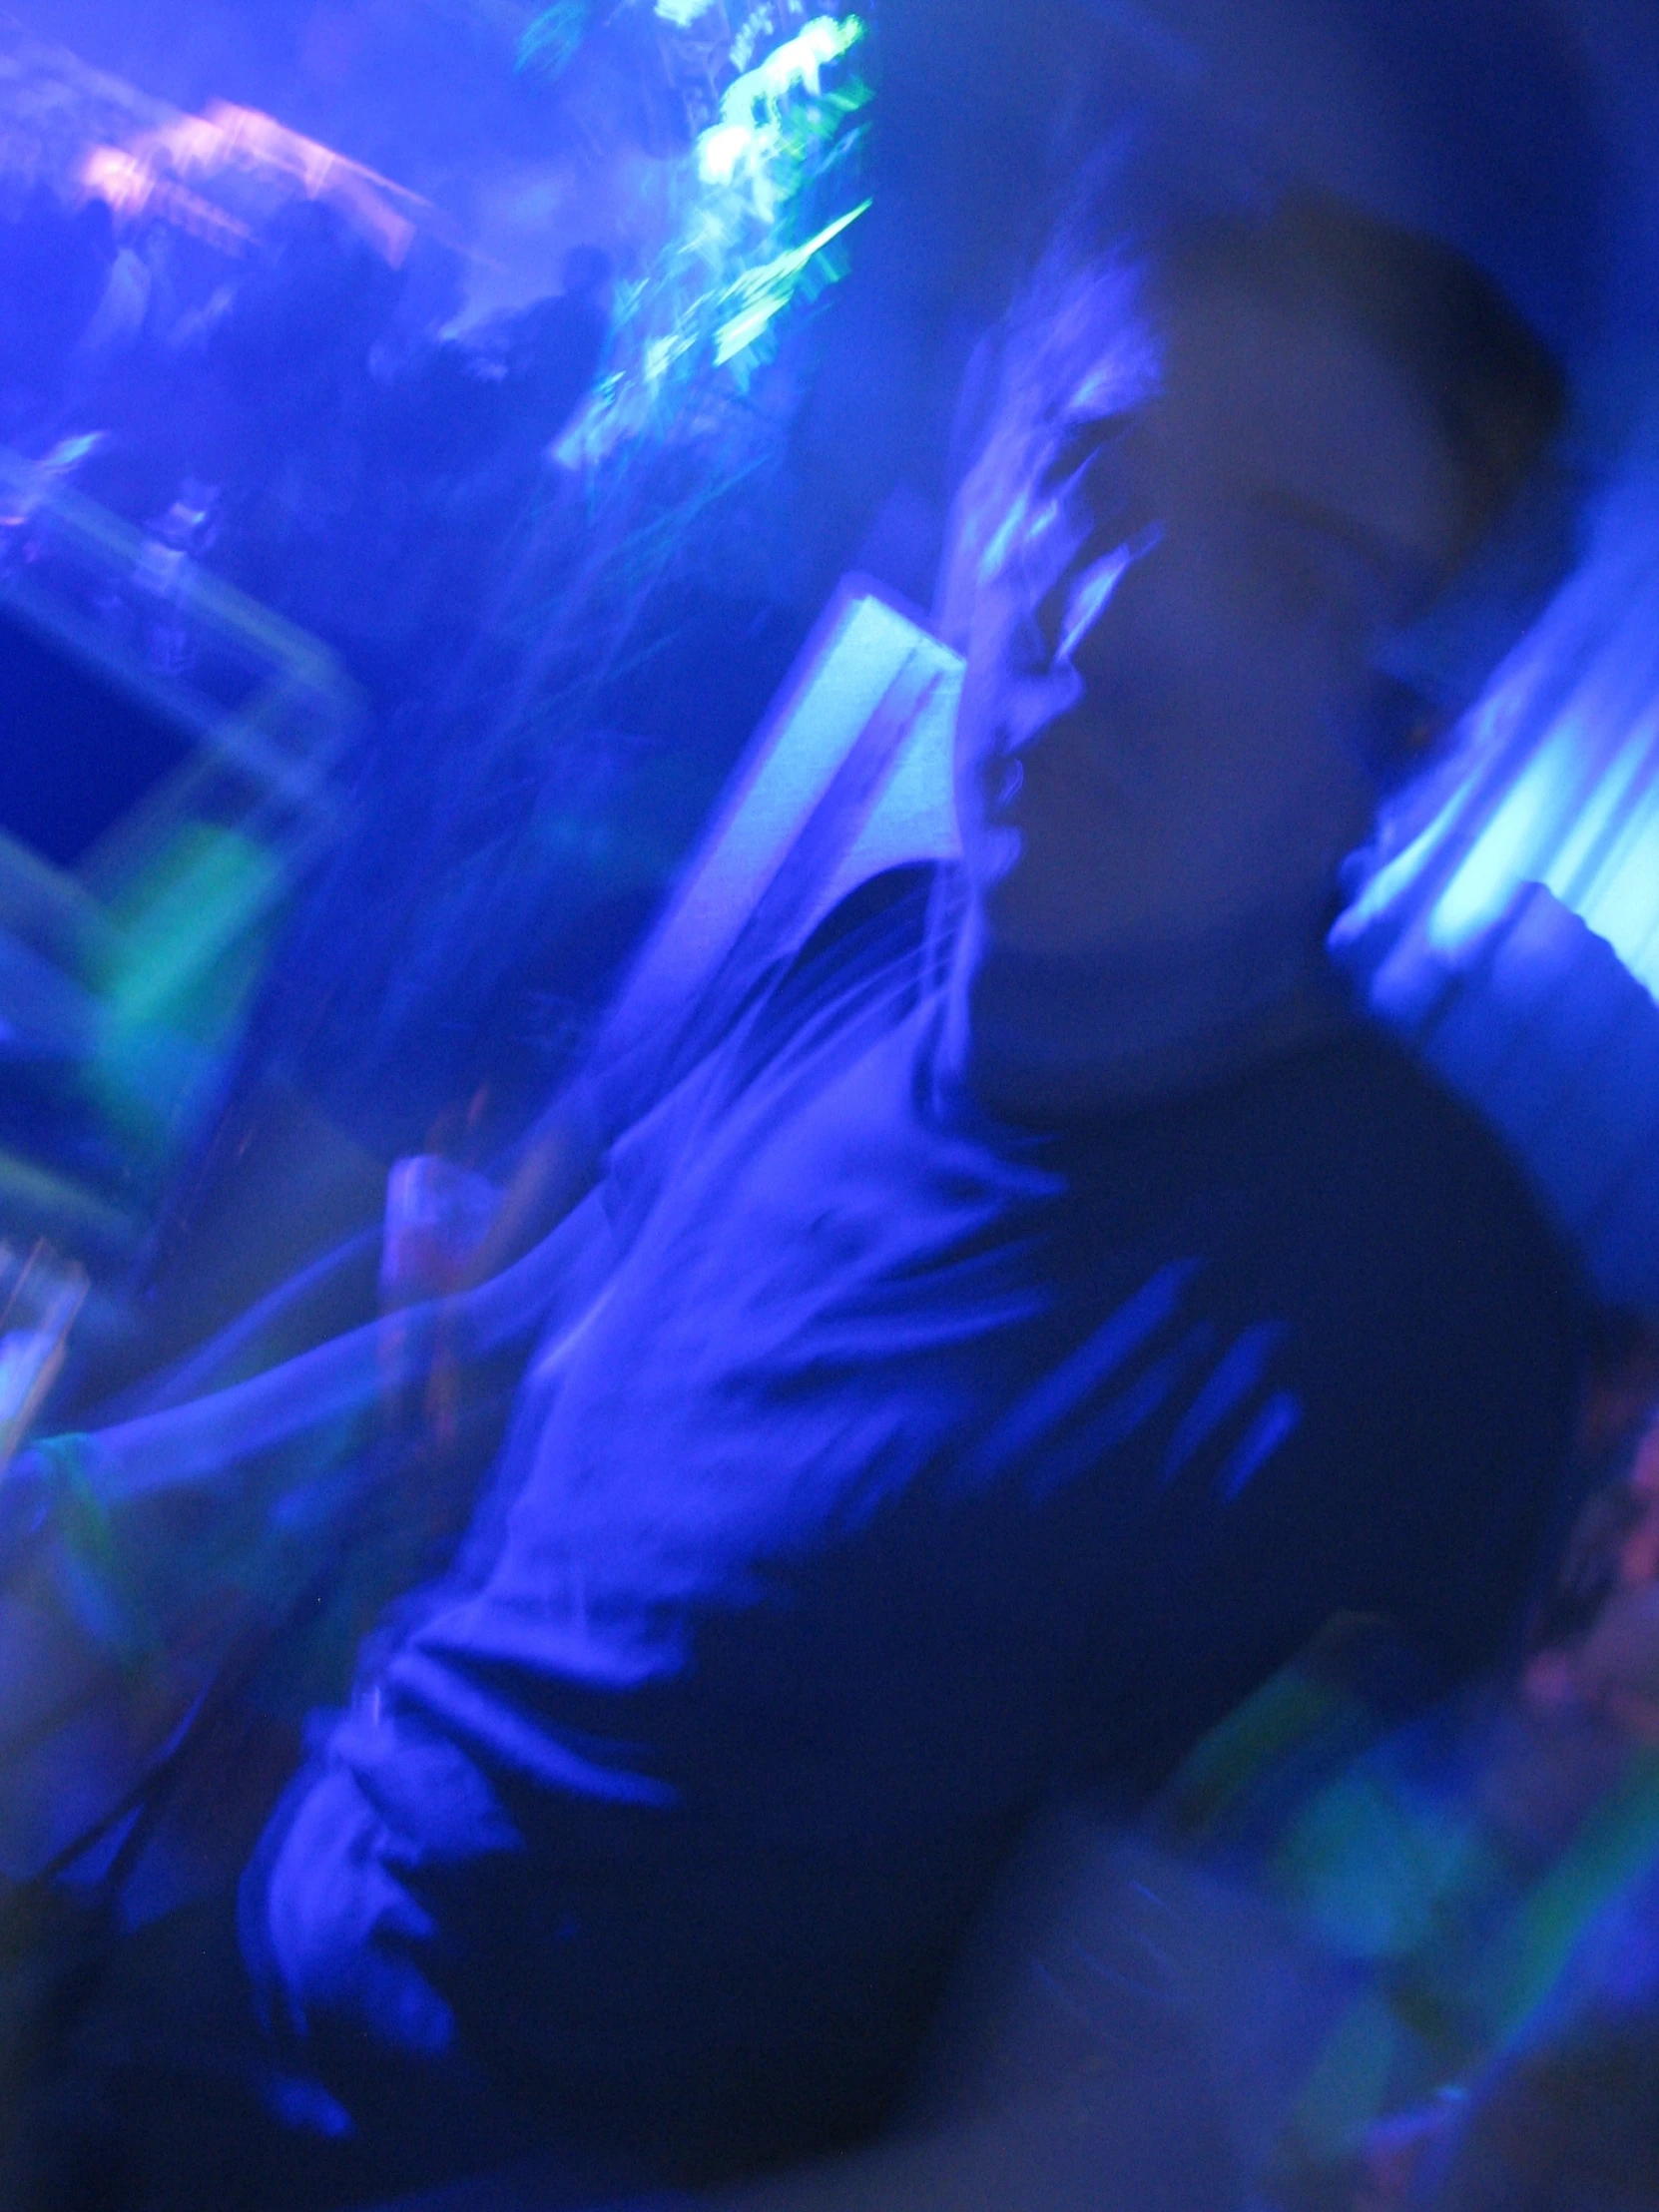 a man standing in a room with green and blue lights